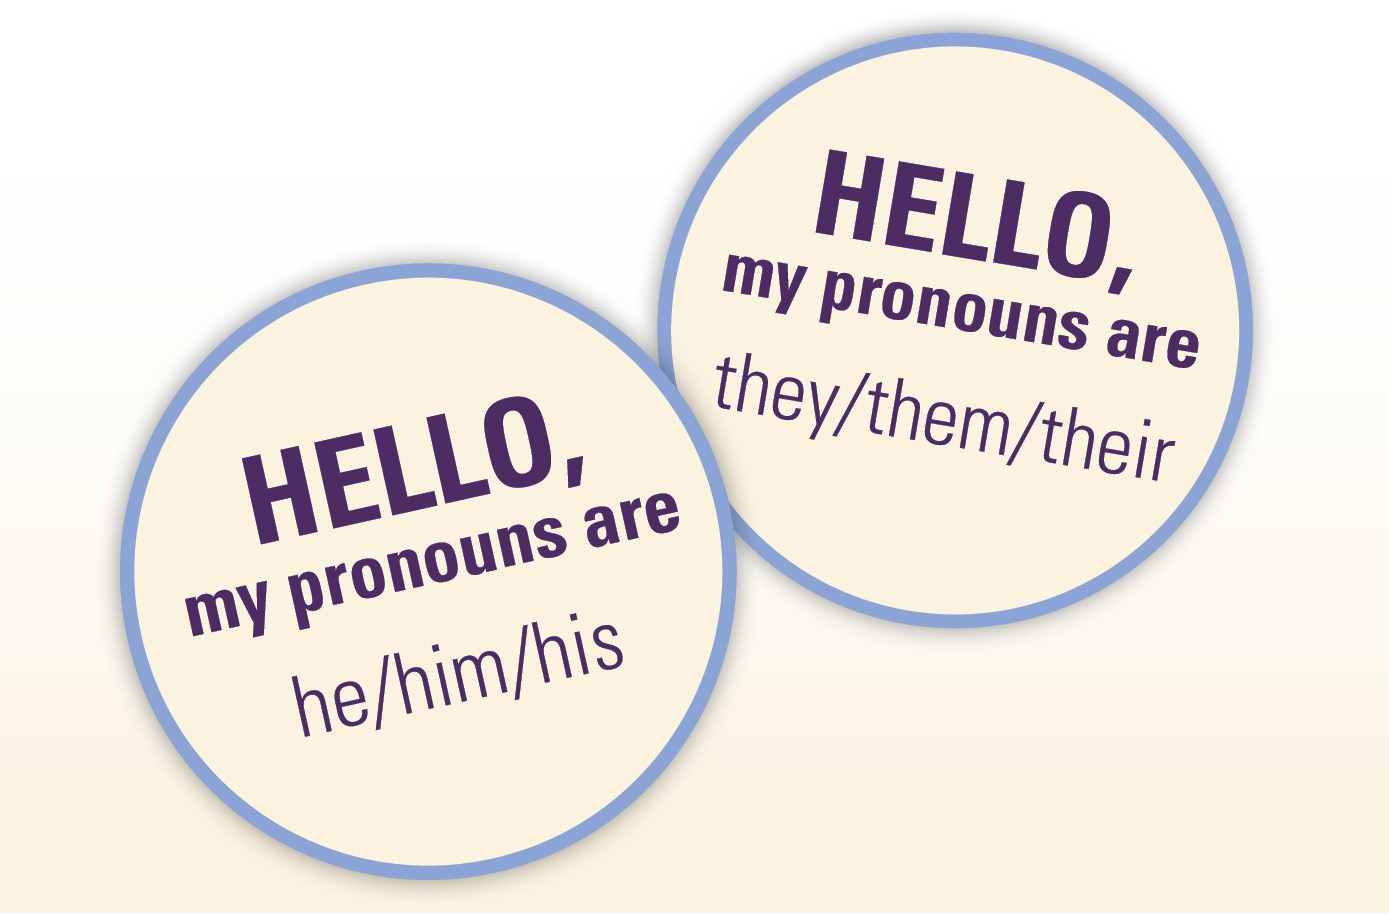 Pronoun graphics for he/him/his and they/them/their